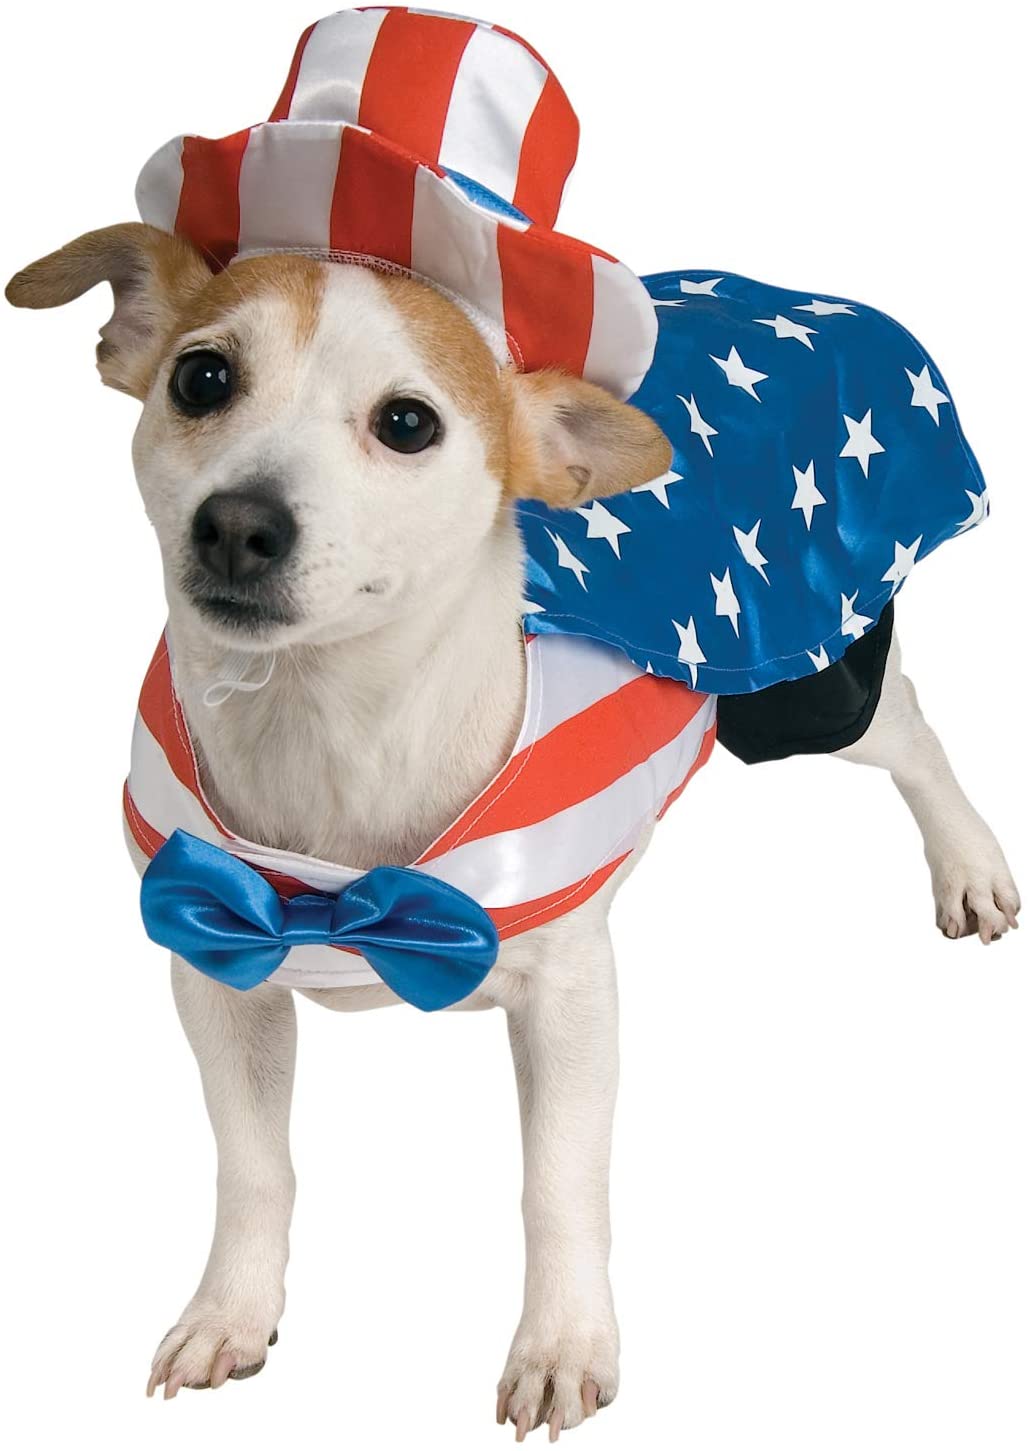 100% Cotton Holiday Festival Dog Costume Dog Clothes for Small Dogs Cats Puppy Pet Kitten Doggie Shirts Outfits Apparel Clothing Fitwarm Holiday Theme Dog Dress for 4th of July Memorial Day Christmas New Year Halloween Easter 